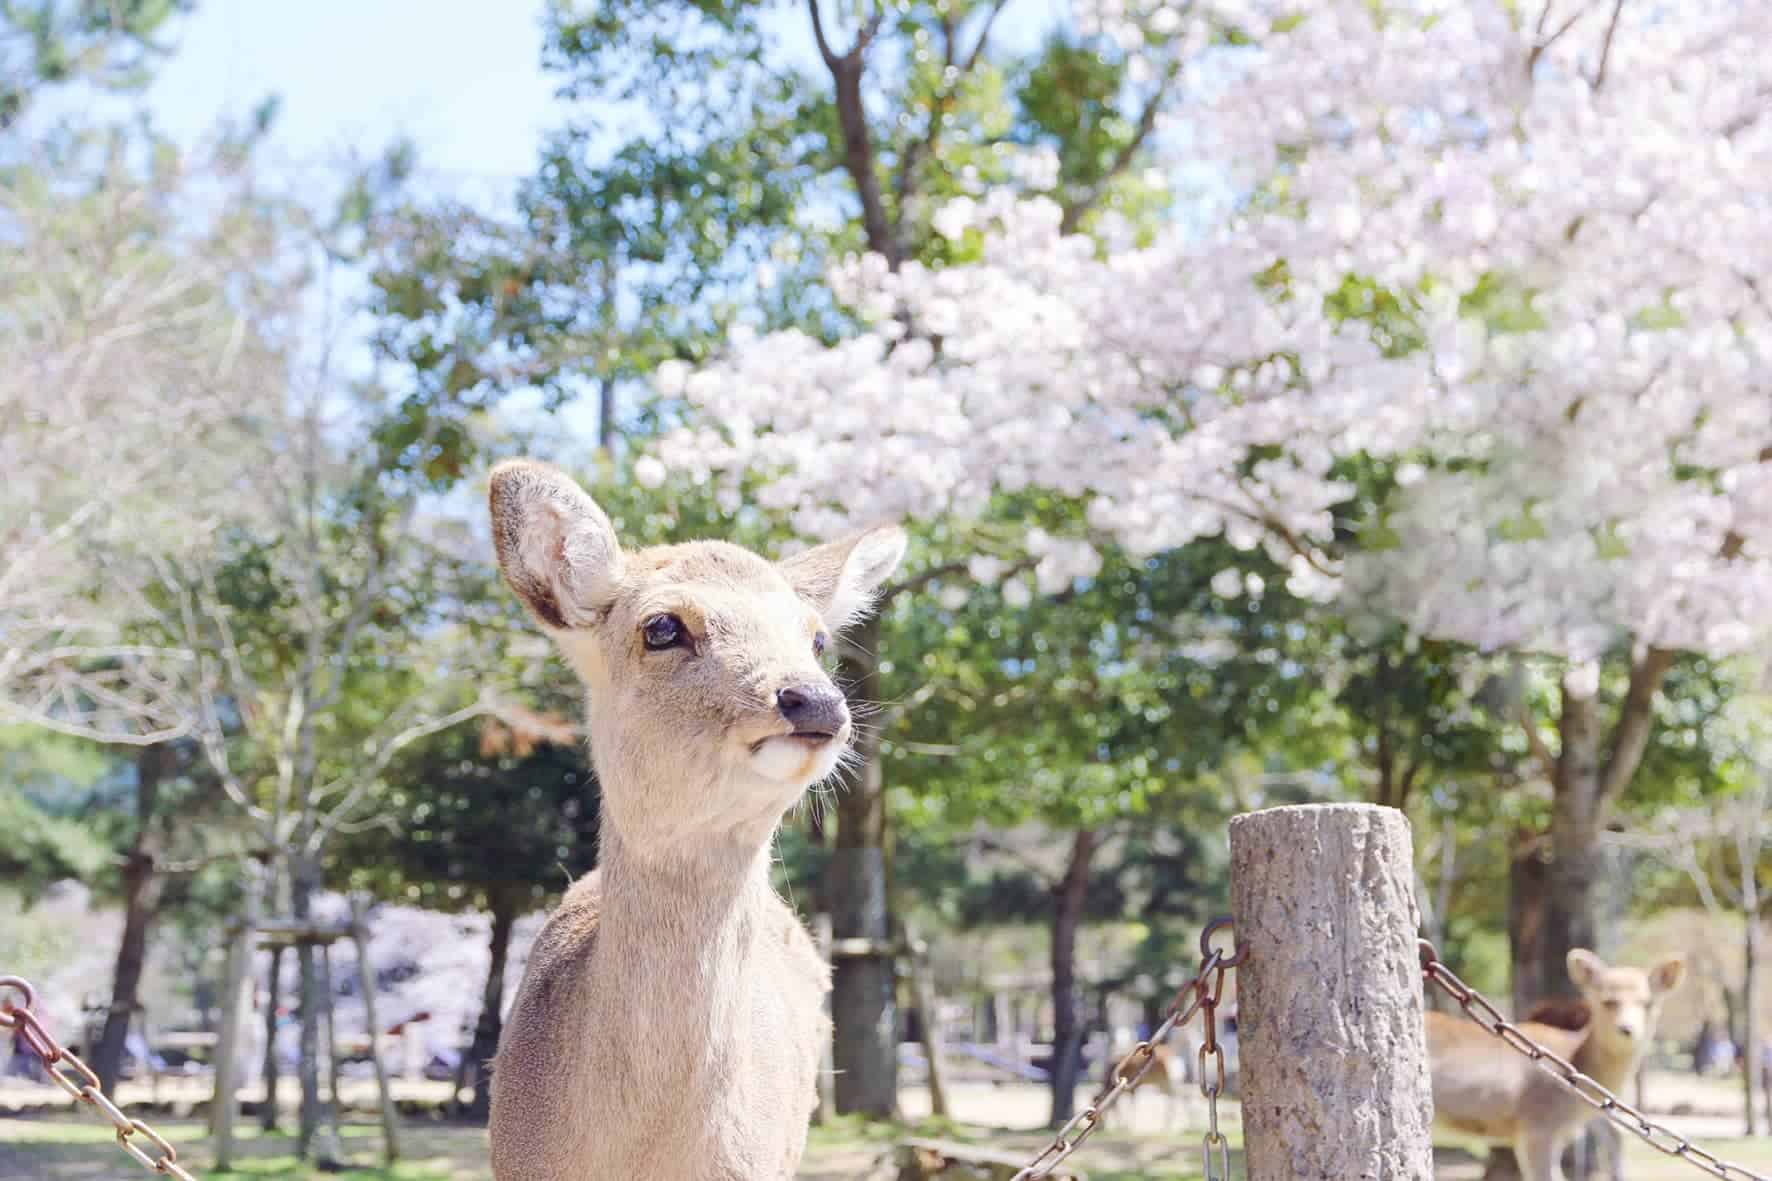 Go to Nara and follow the red deer Bambi